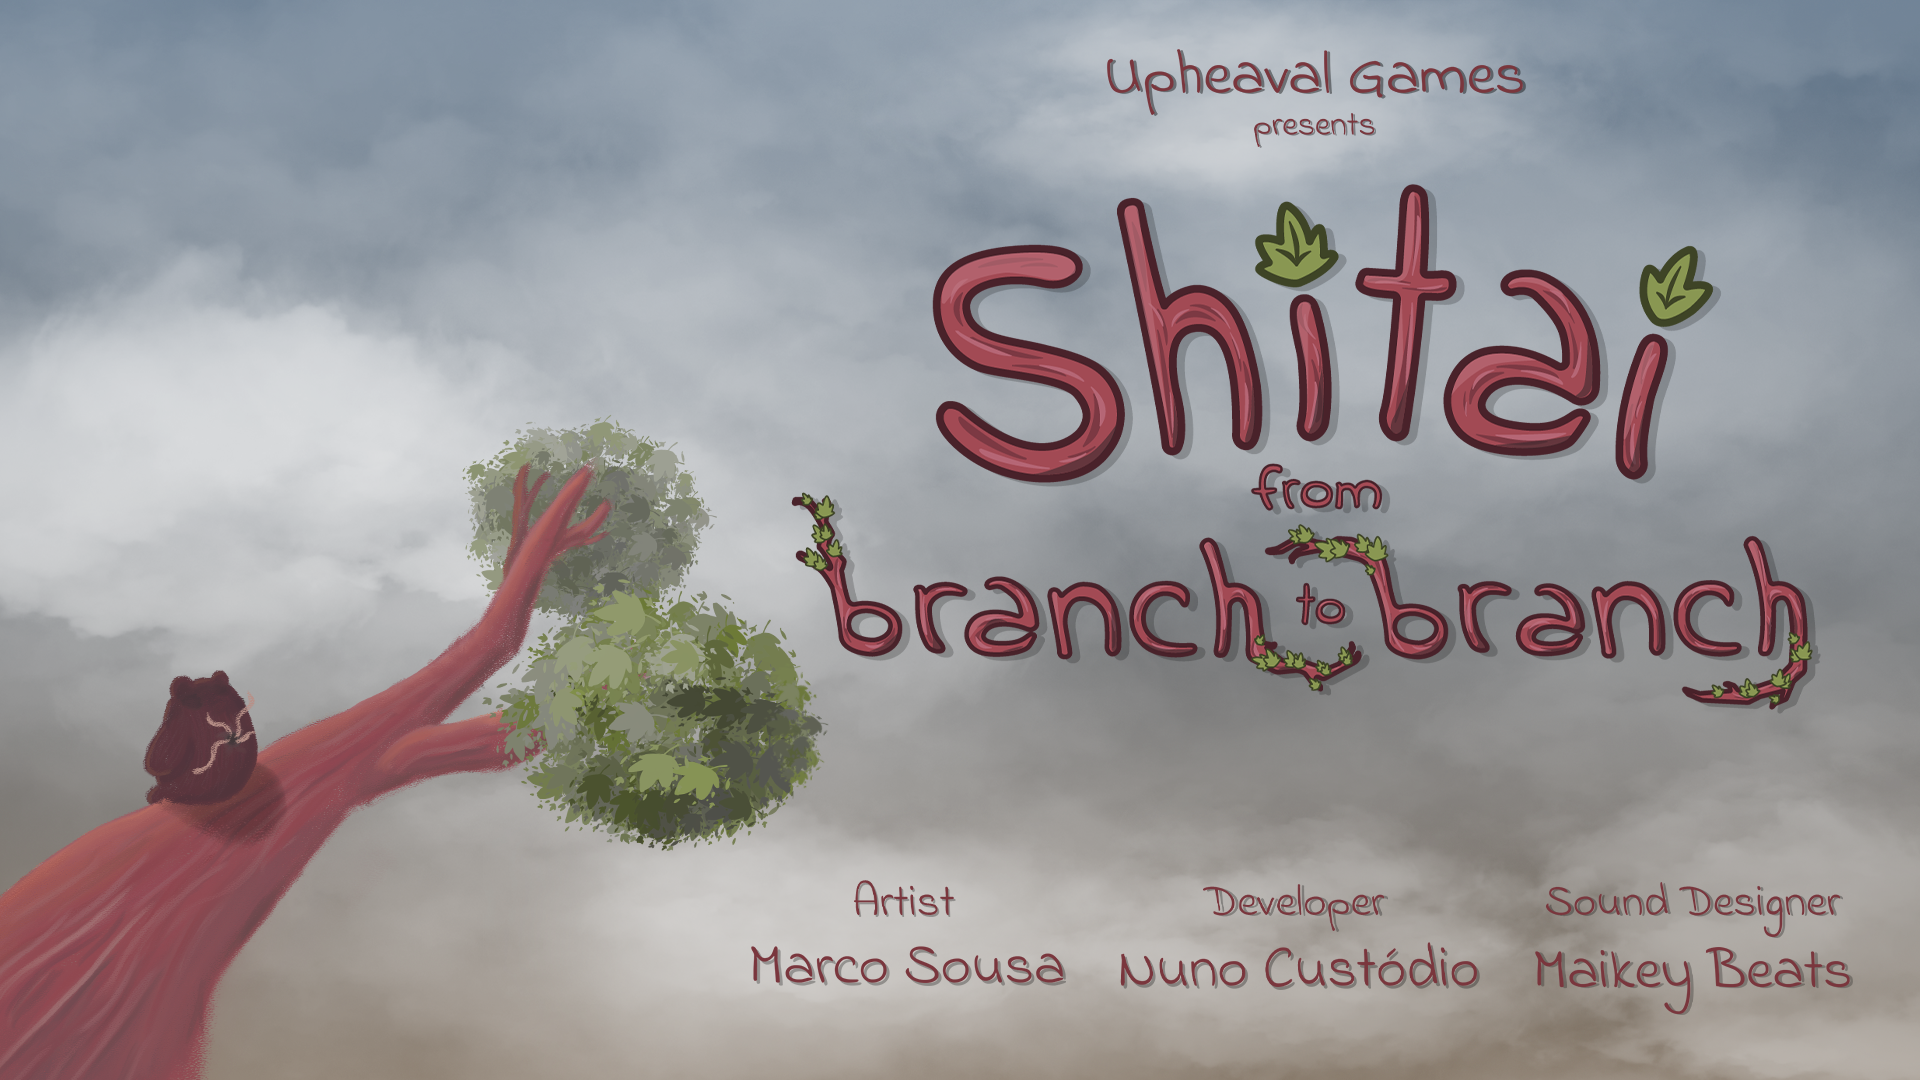 Shitai, from branch to branch